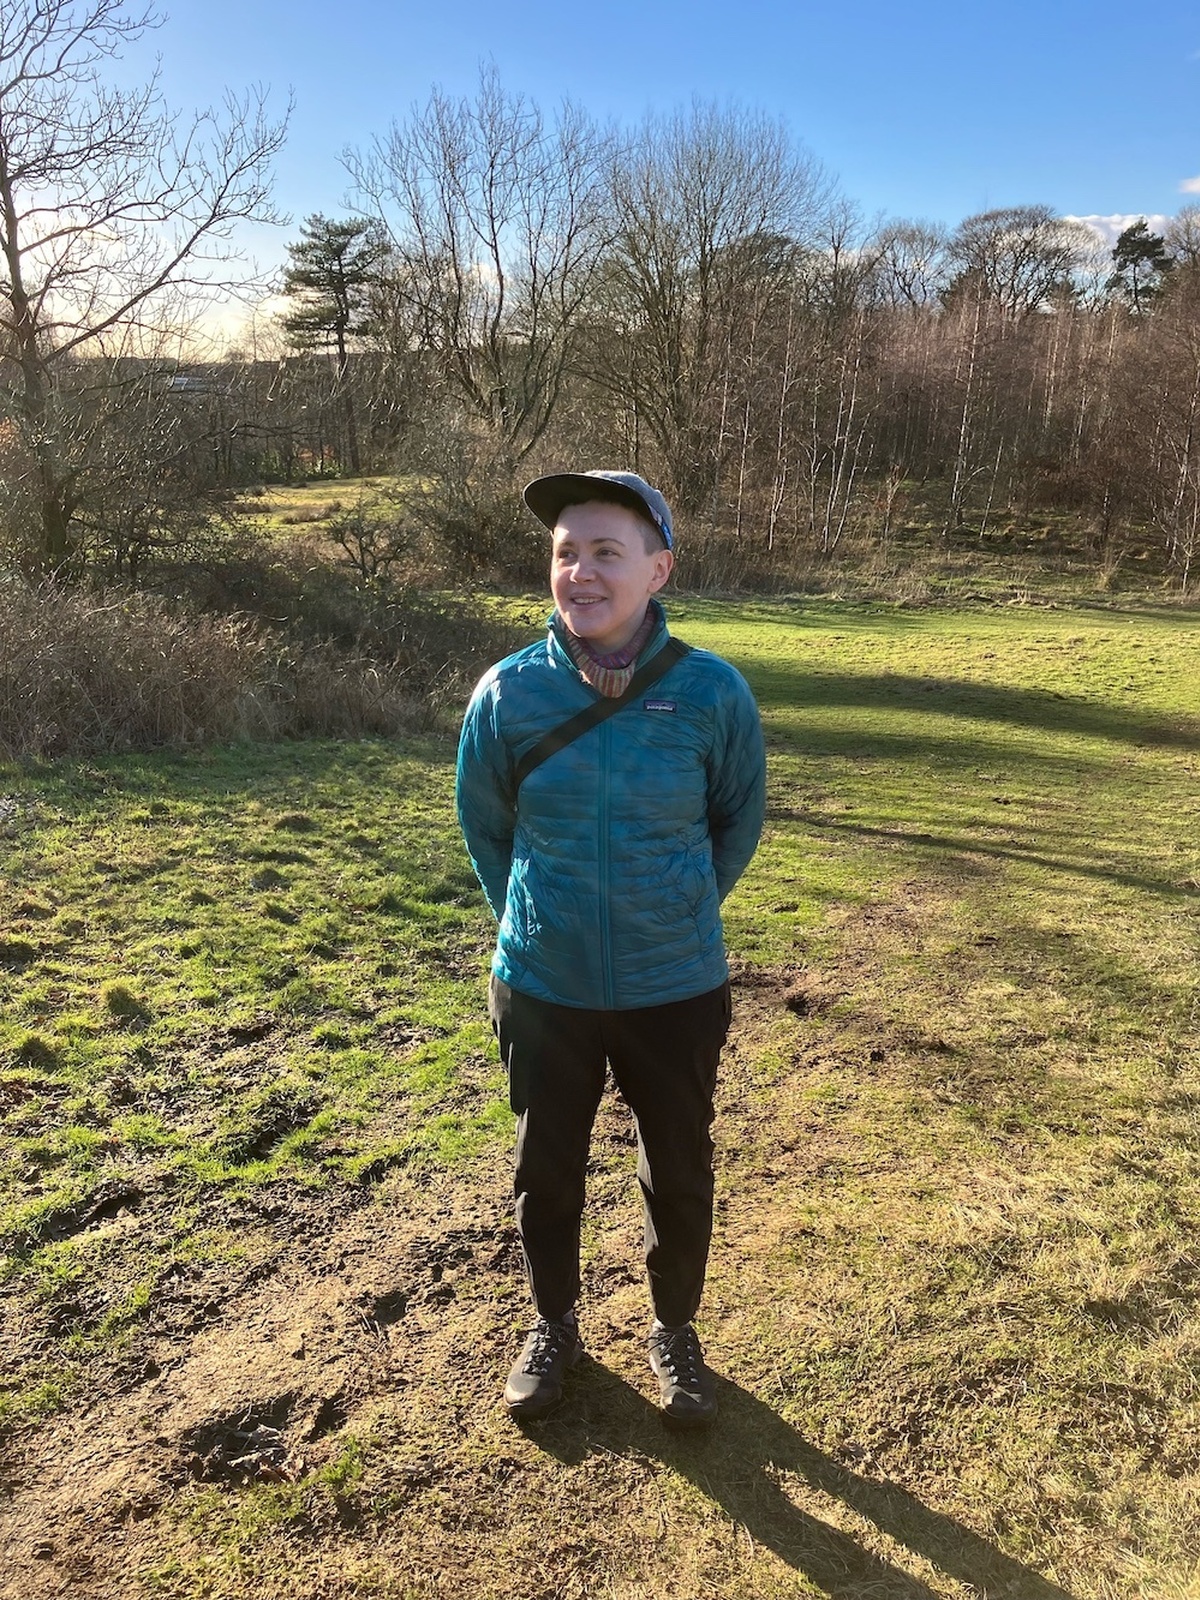 Emma Balkind standing in a sunny green space, wearing a blue jacket and cap.